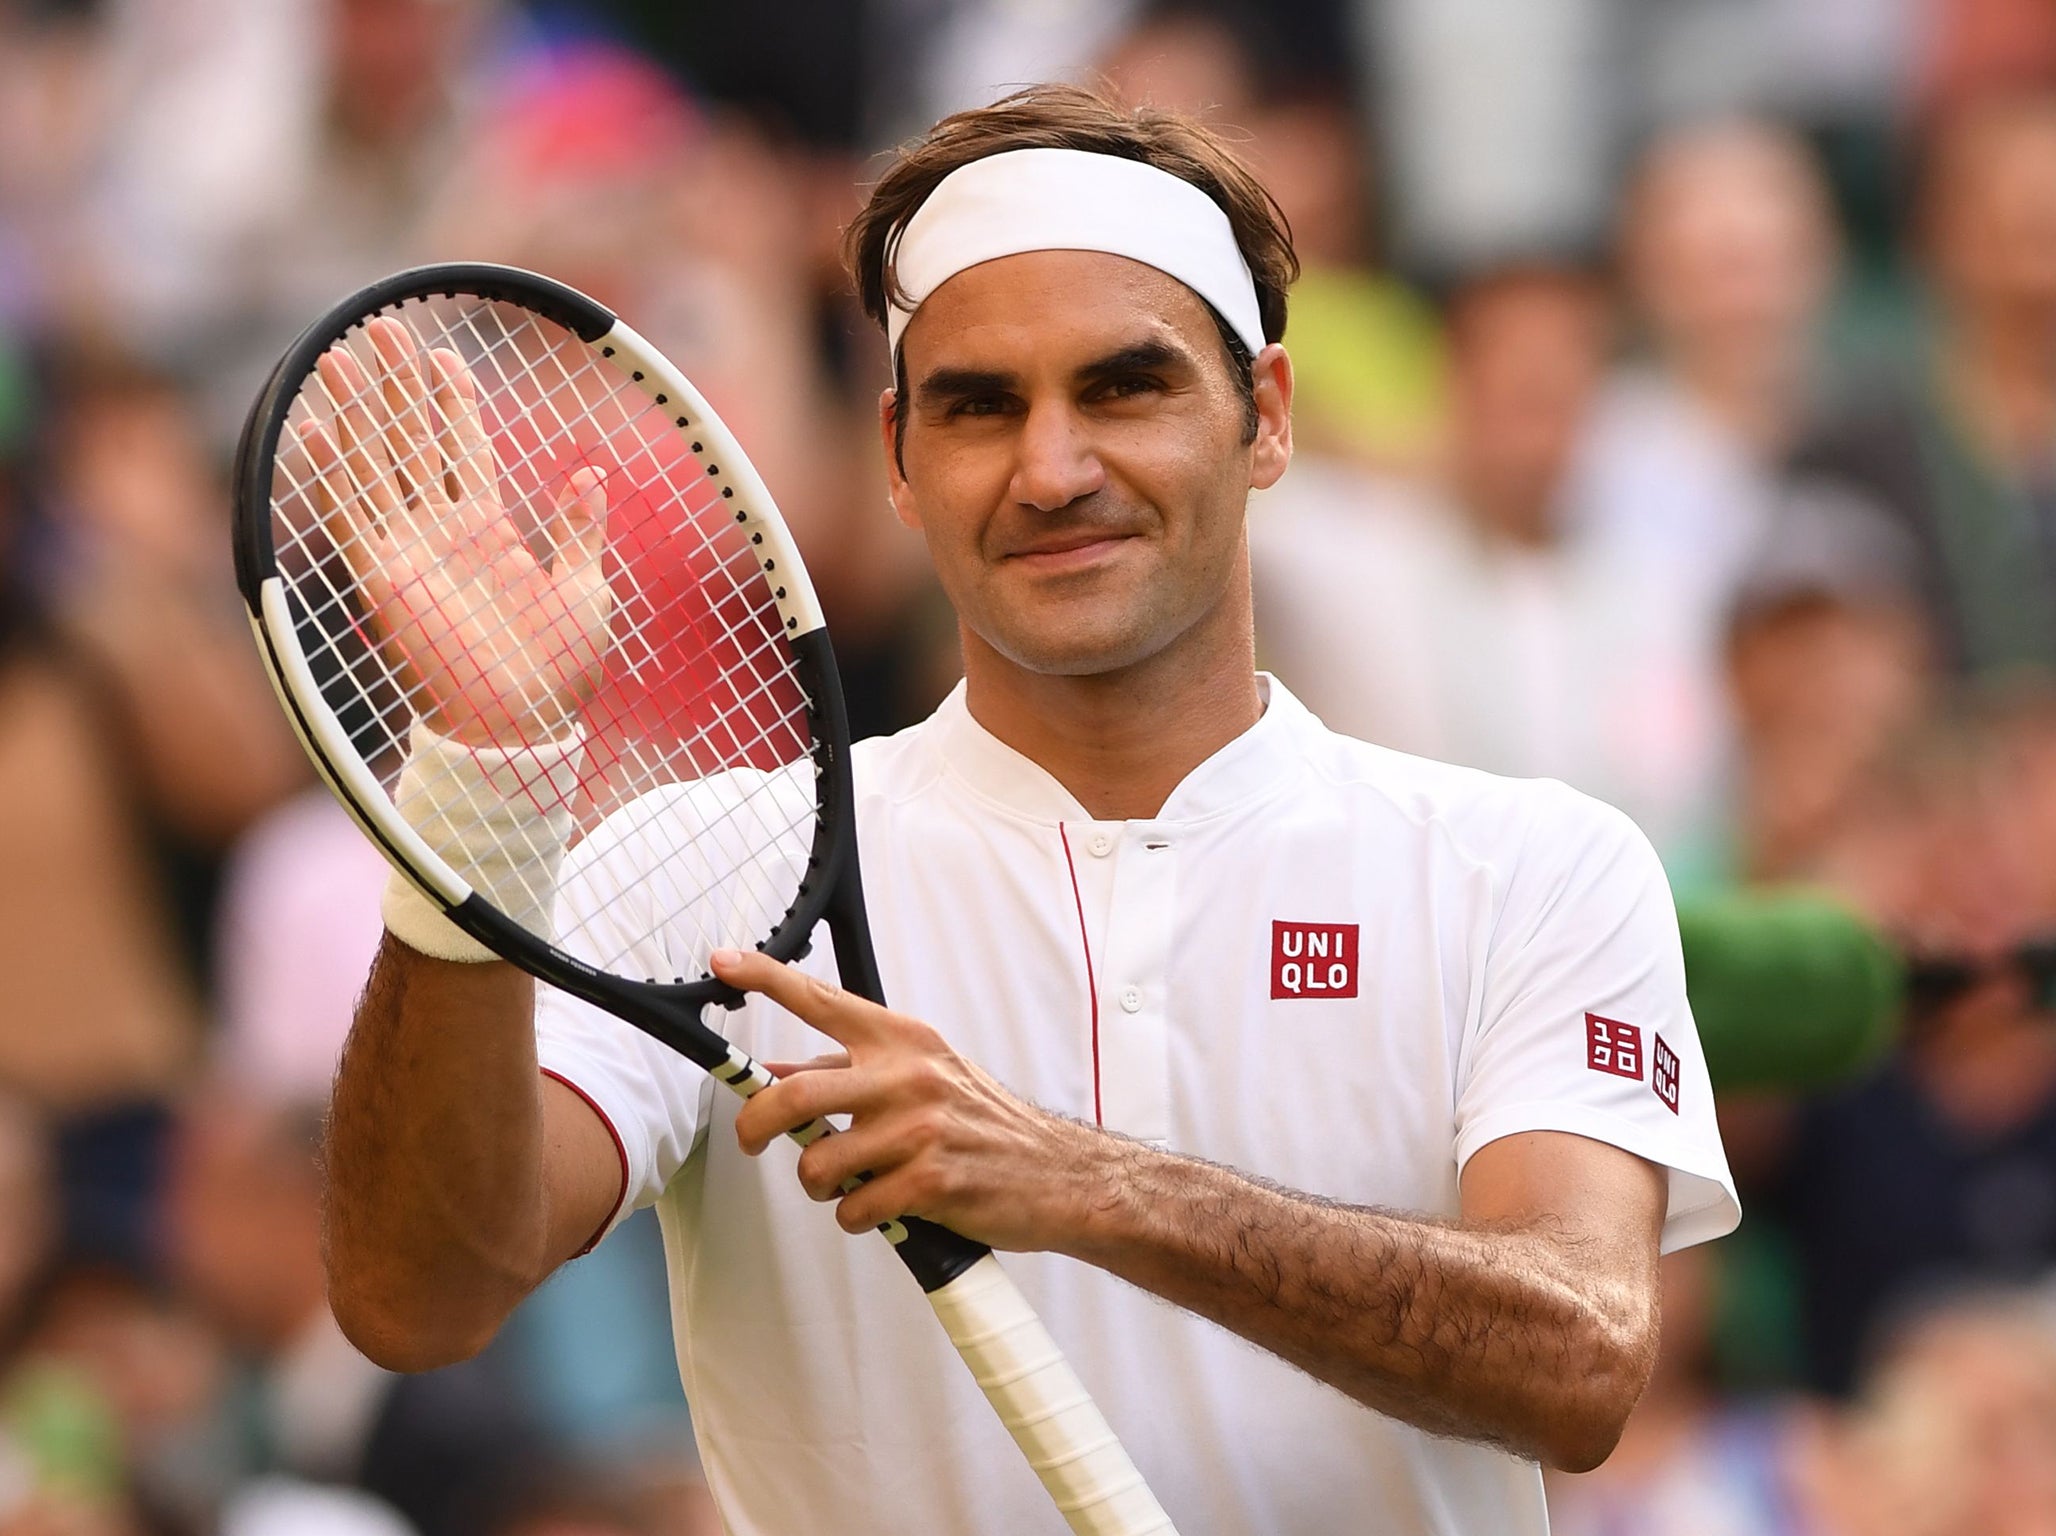 Roger Federer pulls out of Rogers Cup in bid to protect fitness | The ...